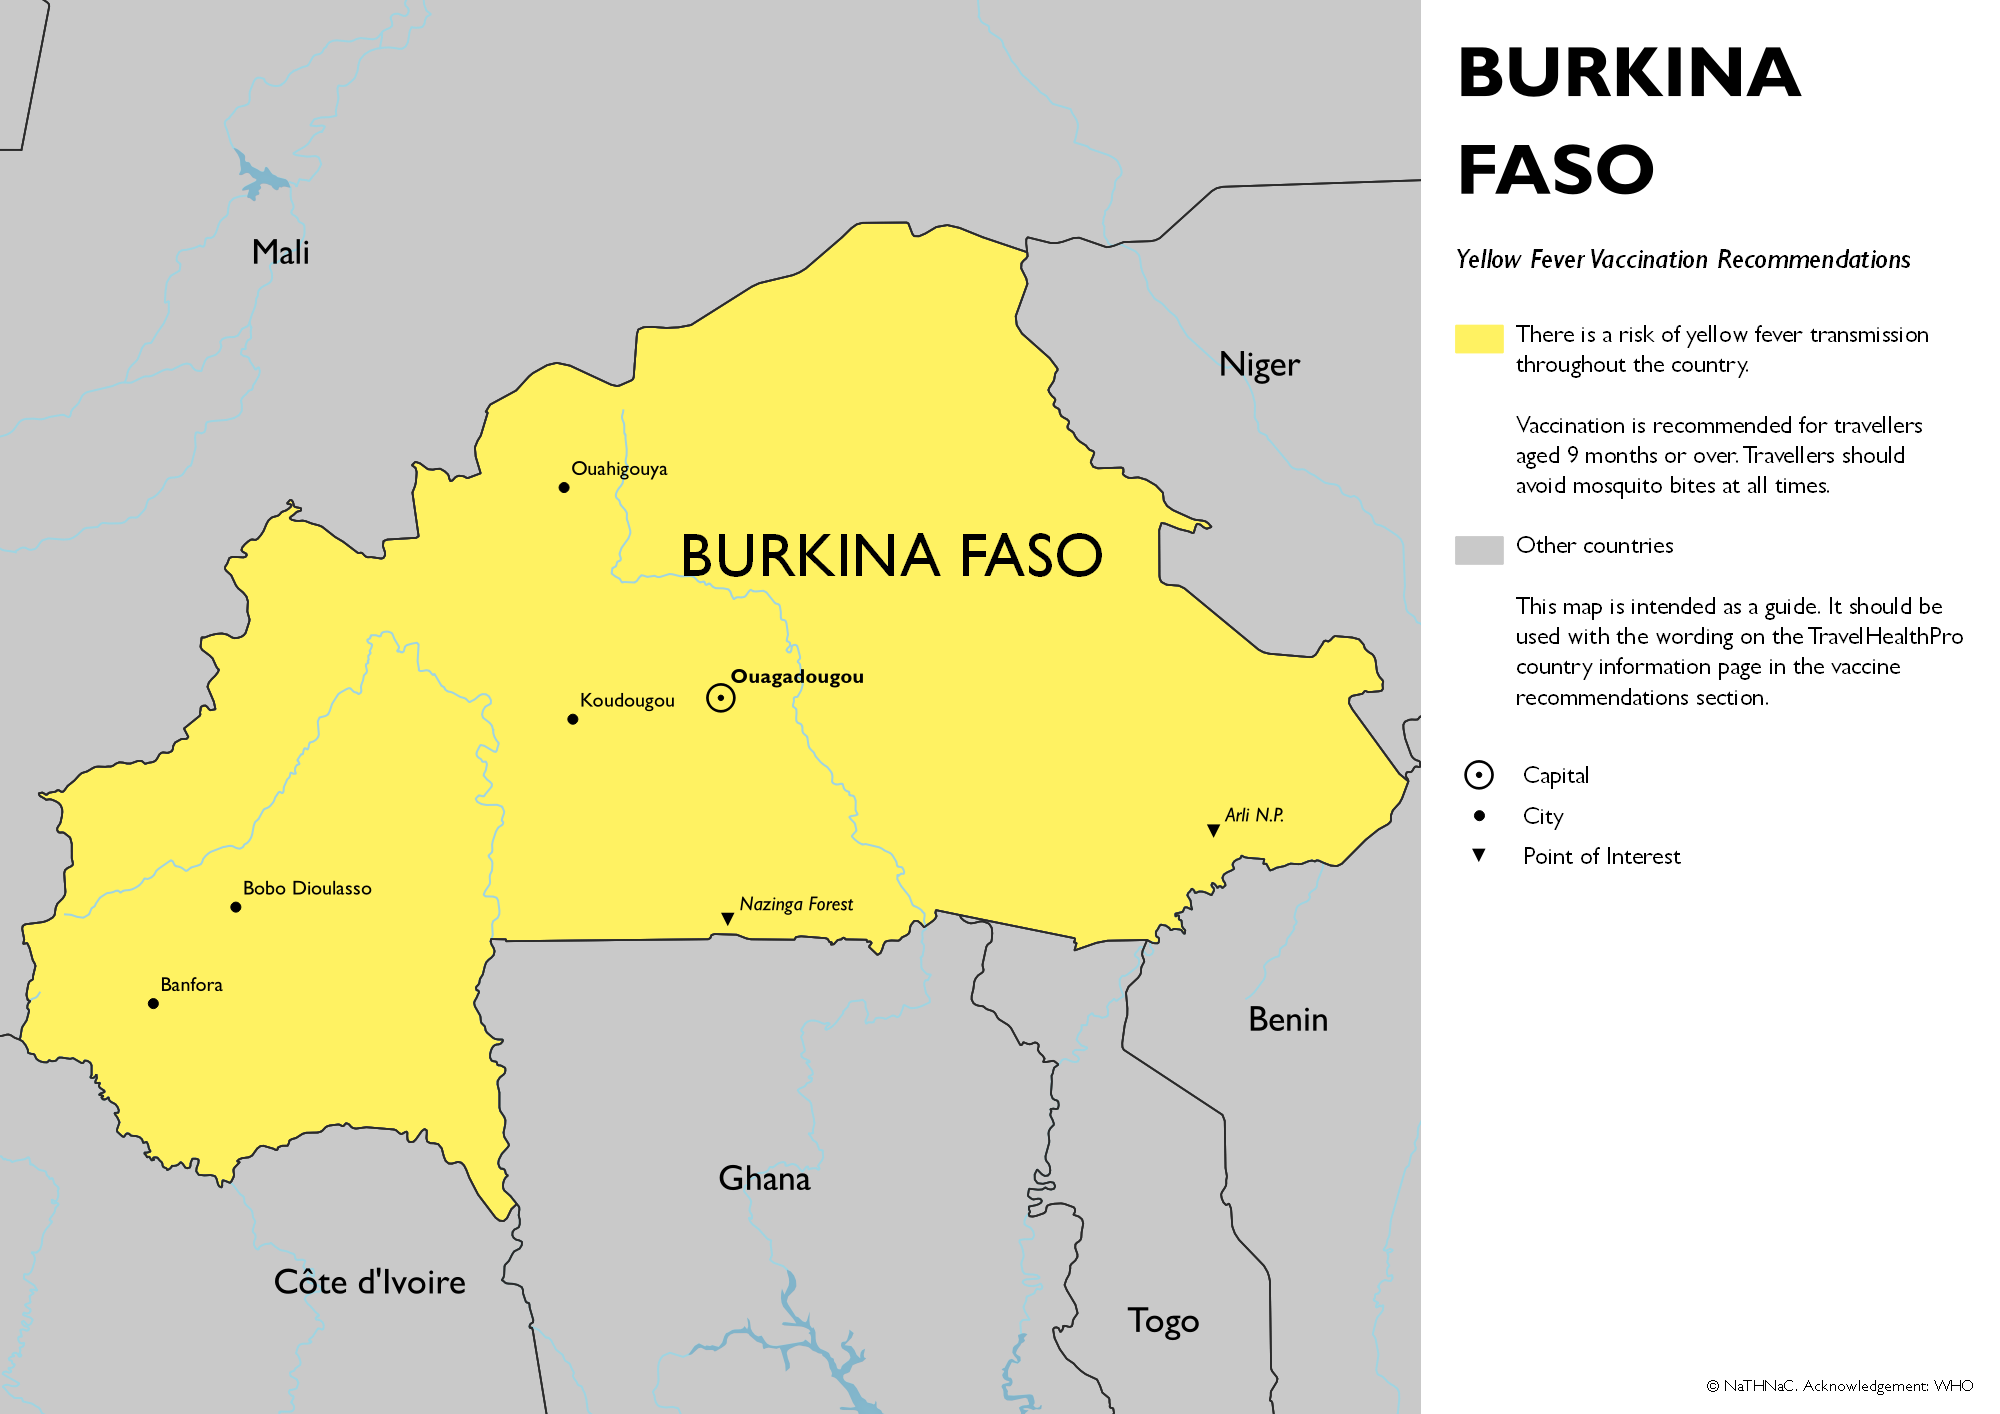 Yellow fever vaccine recommendation map for Burkina Faso